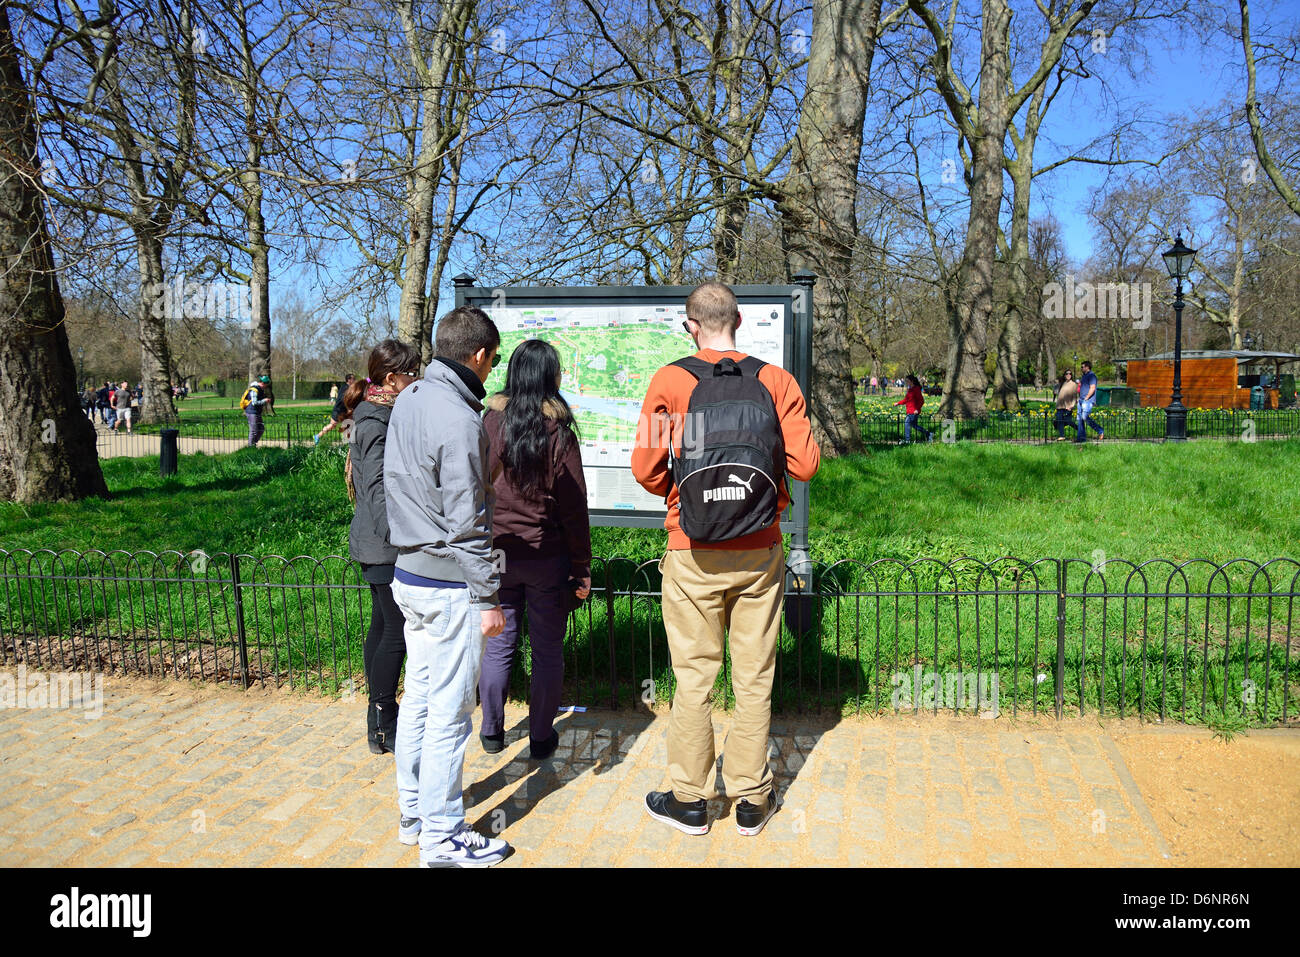 People looking at map of park, Hyde Park, City of Westminster, London, Greater London, England, United Kingdom Stock Photo